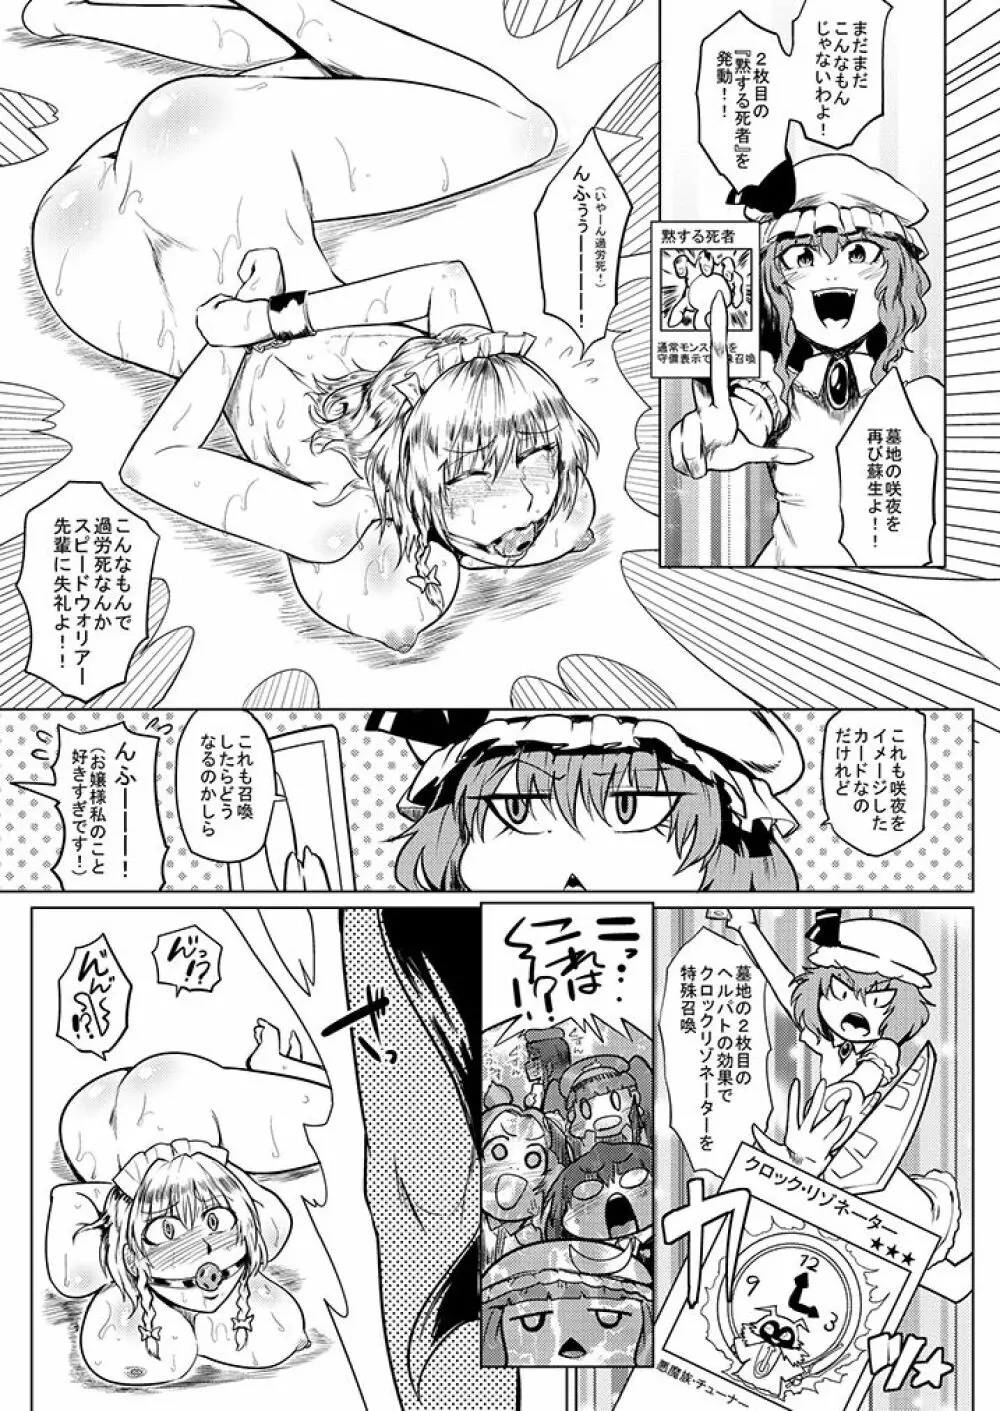 SAKUYA MAID in HEAVEN/ALL IN 1 - page441